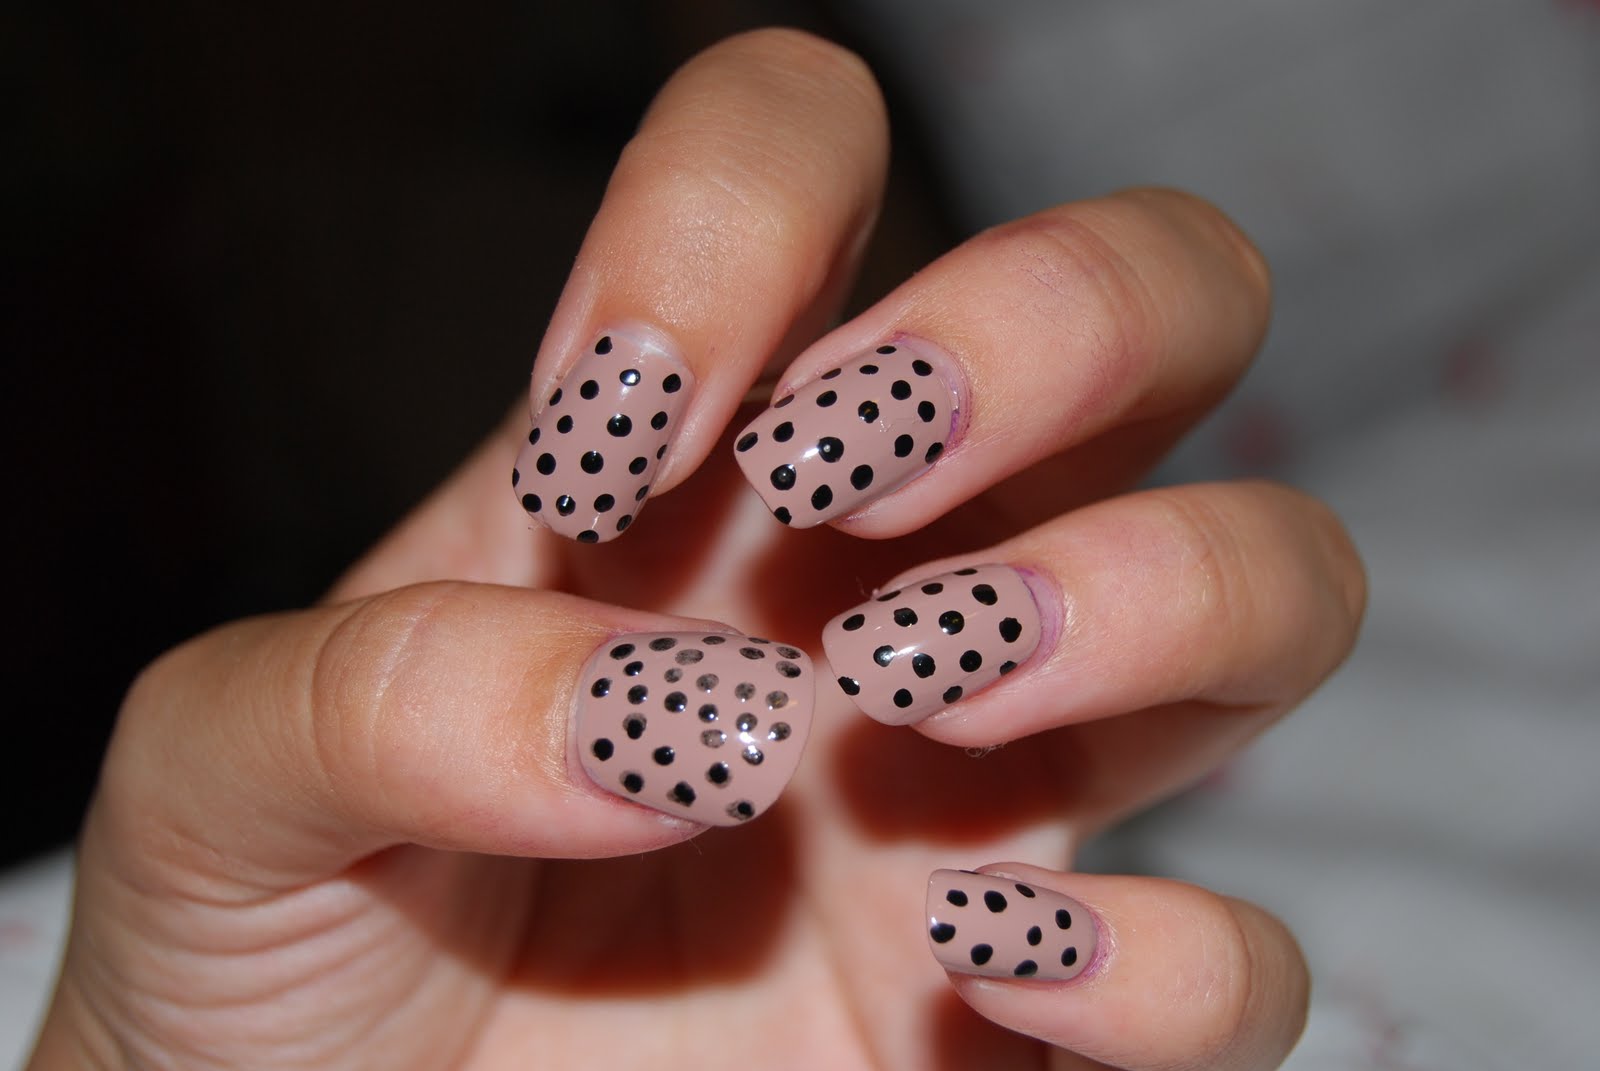 Beige Nails With Black Dots Design Nail Art